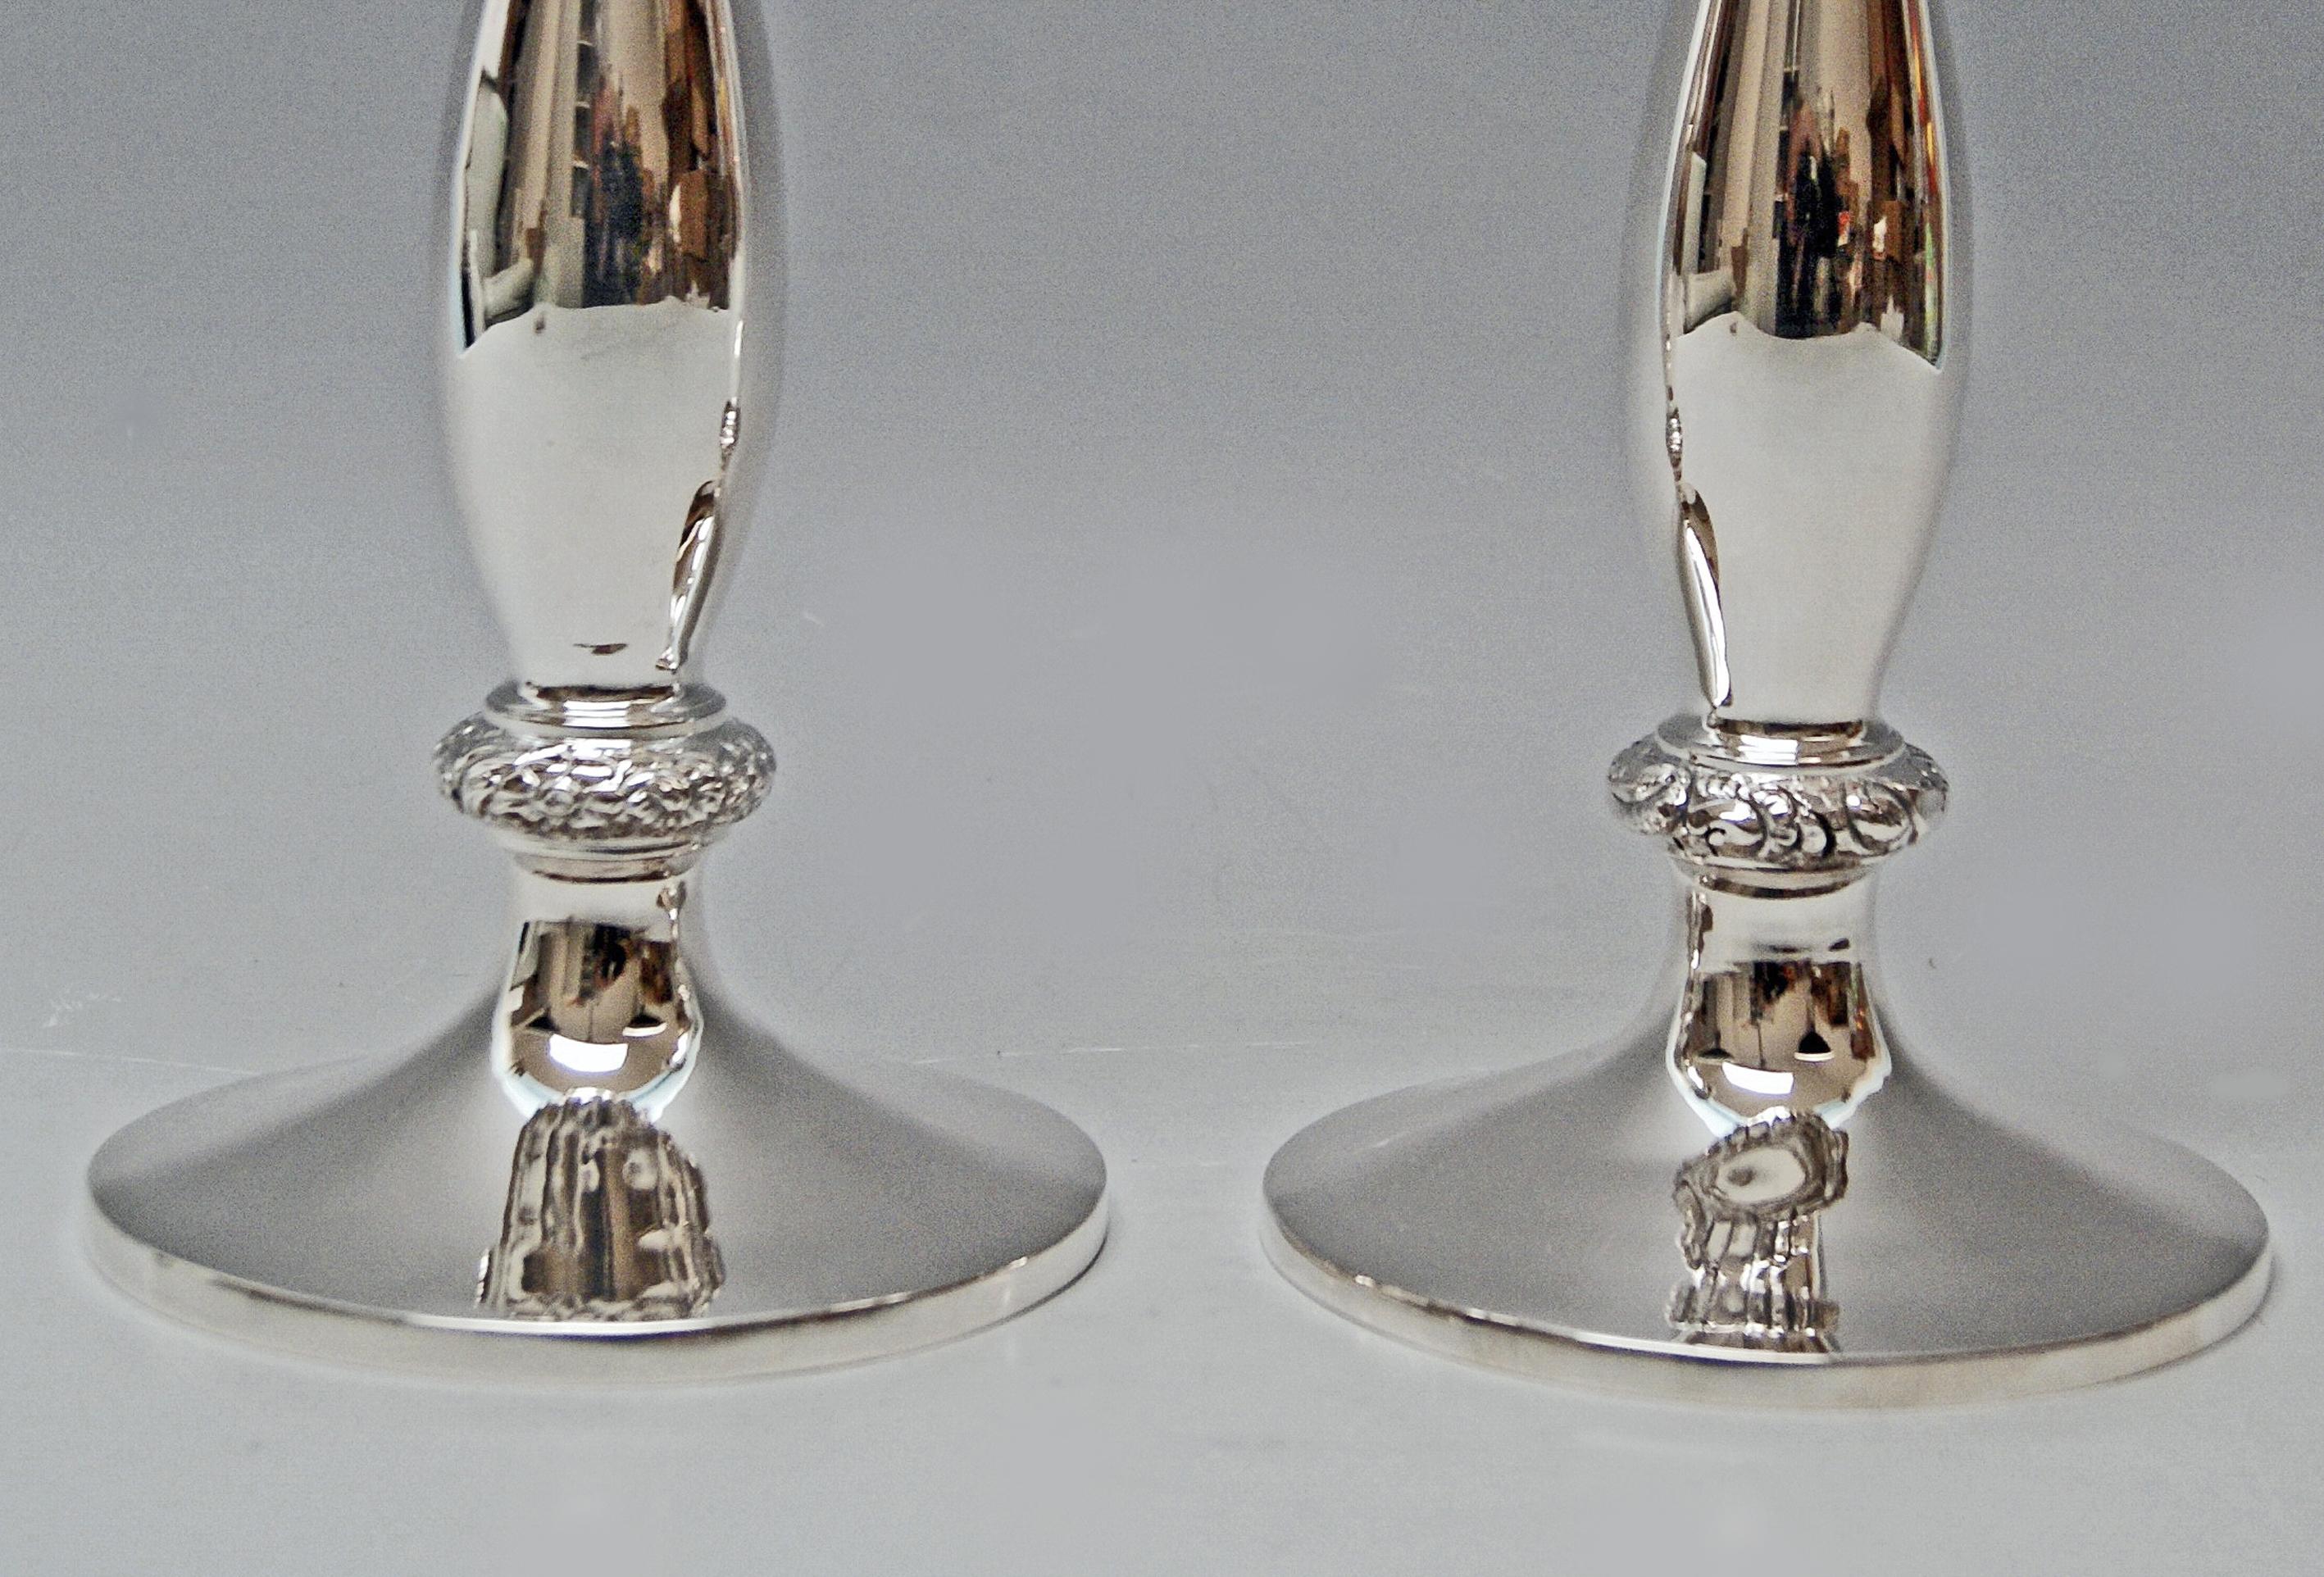 Austrian silver pair of candlesticks of finest manufacturing quality as well as of most elegant appearance:
These candlesticks with smooth surface were made during Viennese Biedermeier period which had been as from circa 1815 until 1850. The